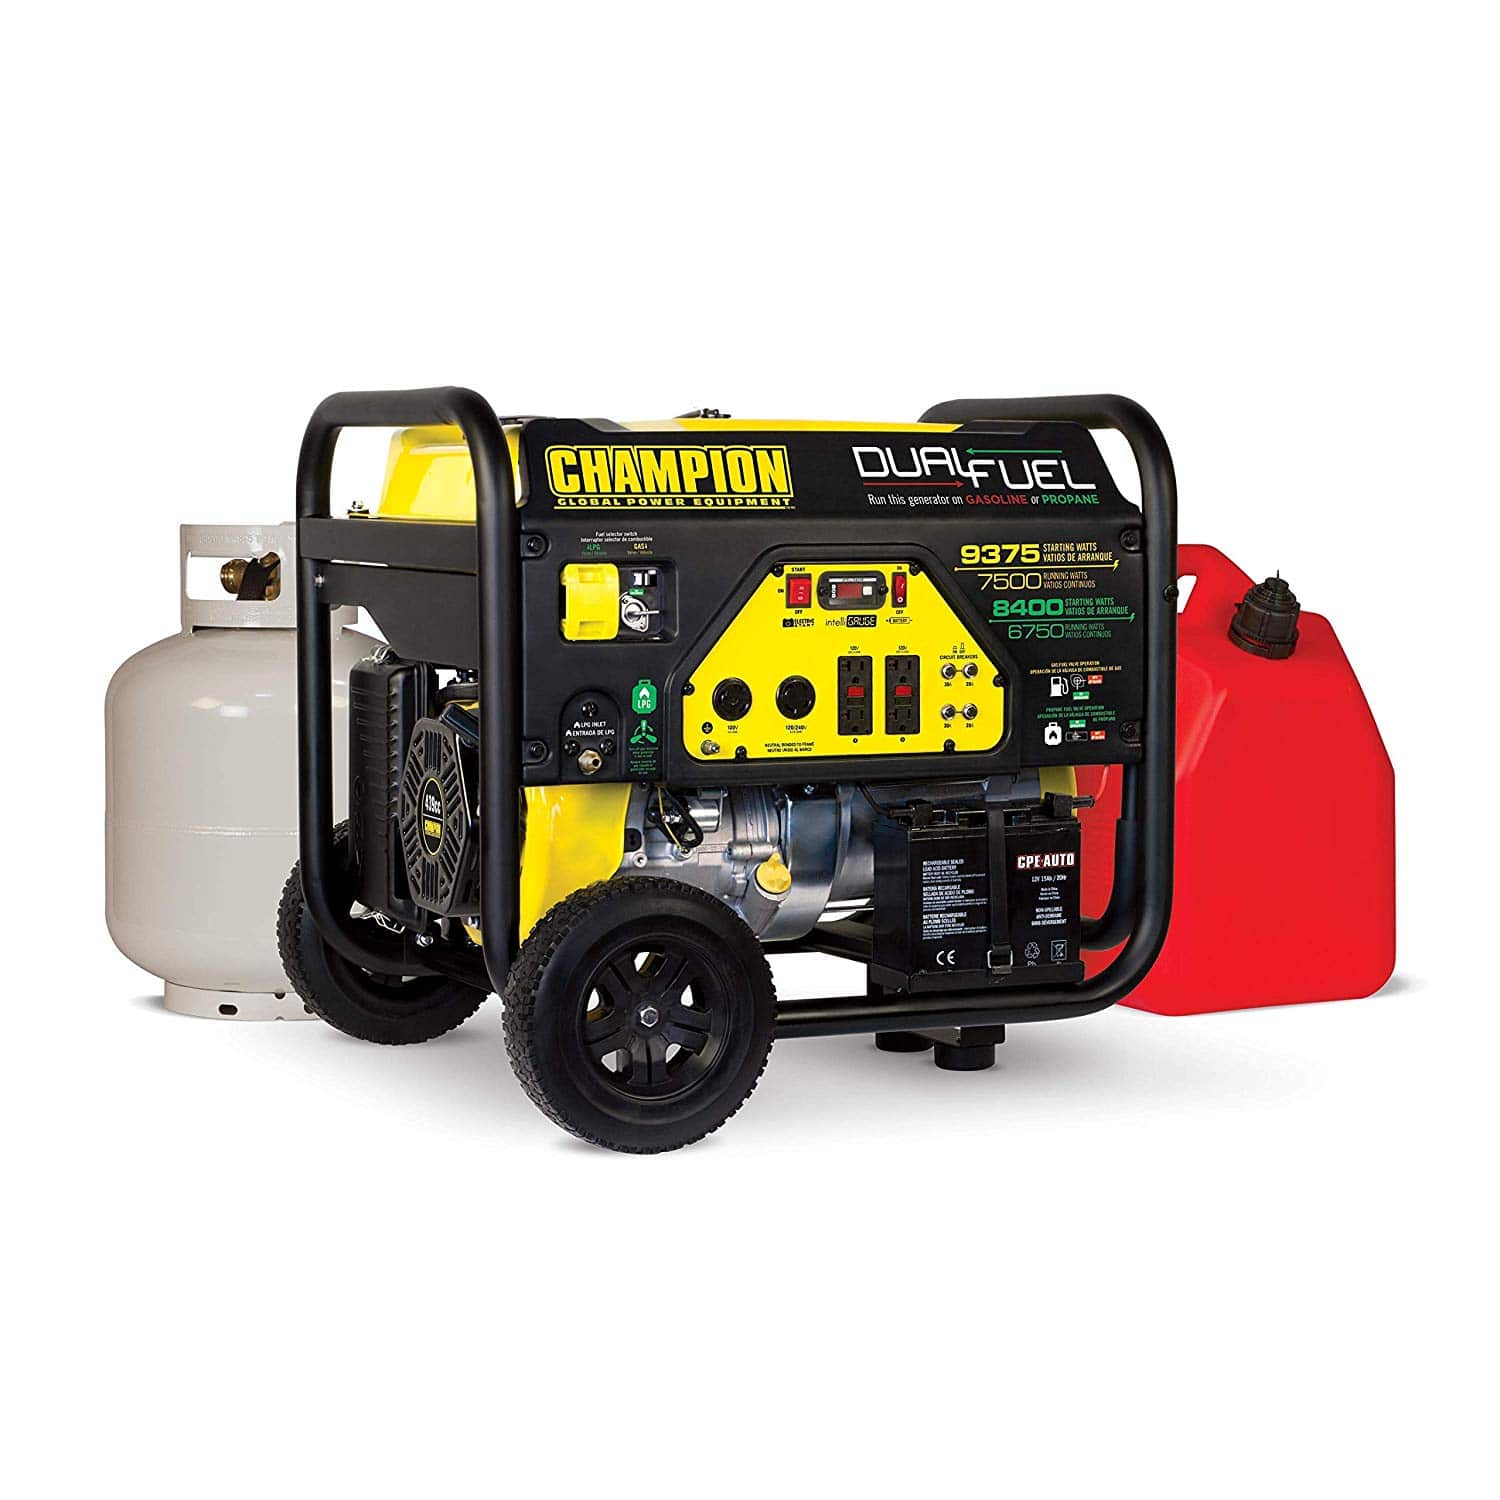 Champion Power Equipment Portable Generator with Electric Start